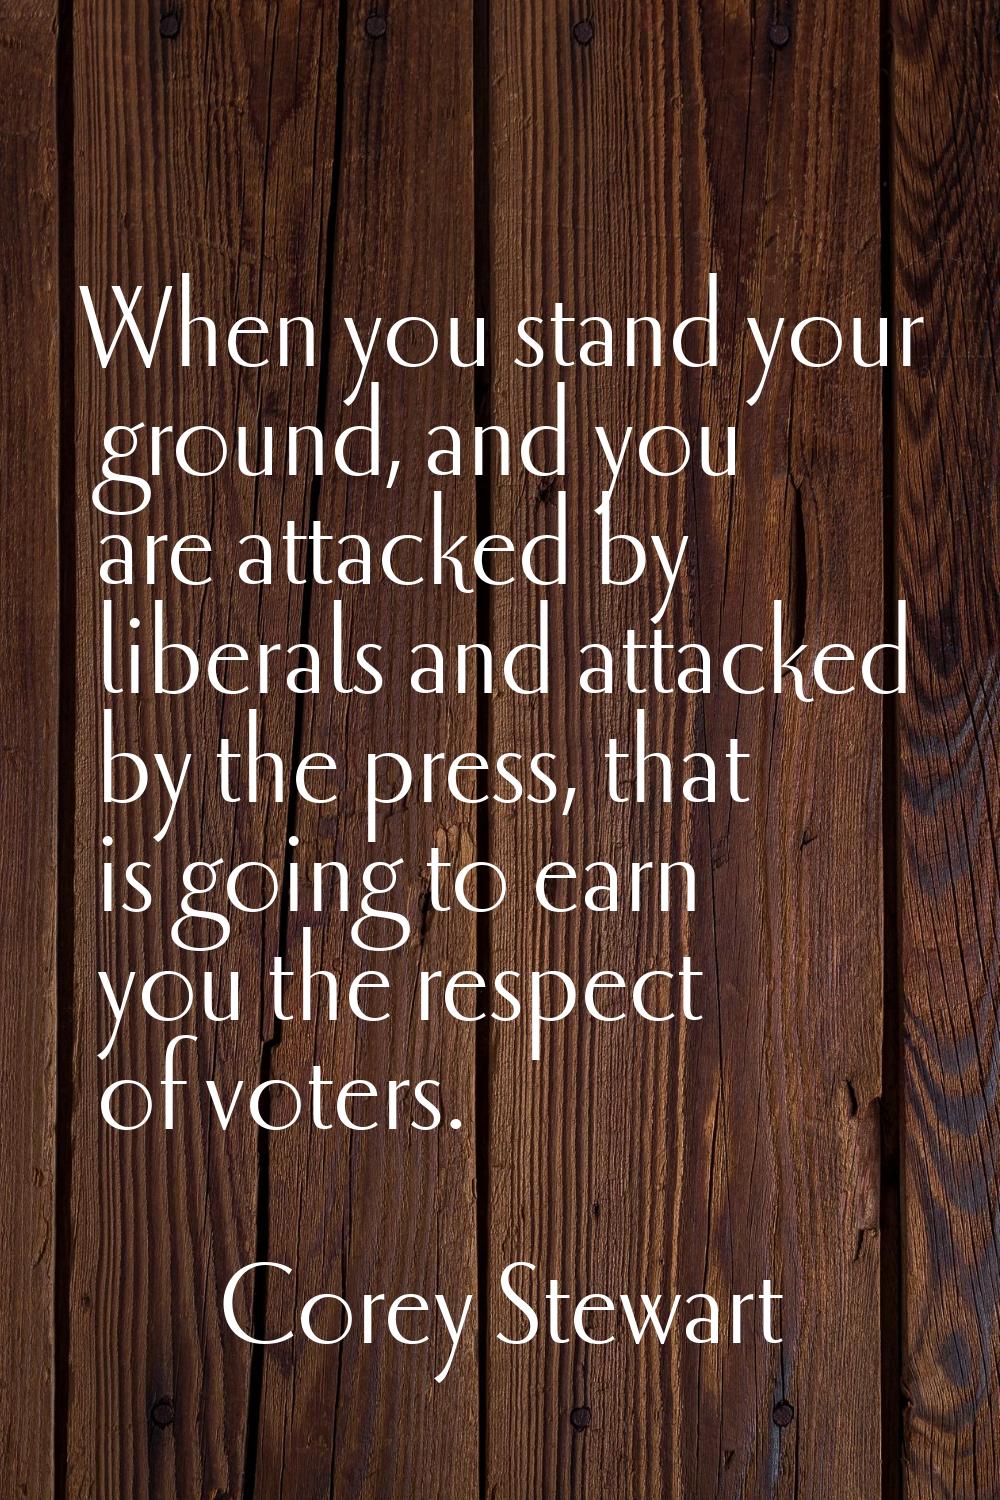 When you stand your ground, and you are attacked by liberals and attacked by the press, that is goi